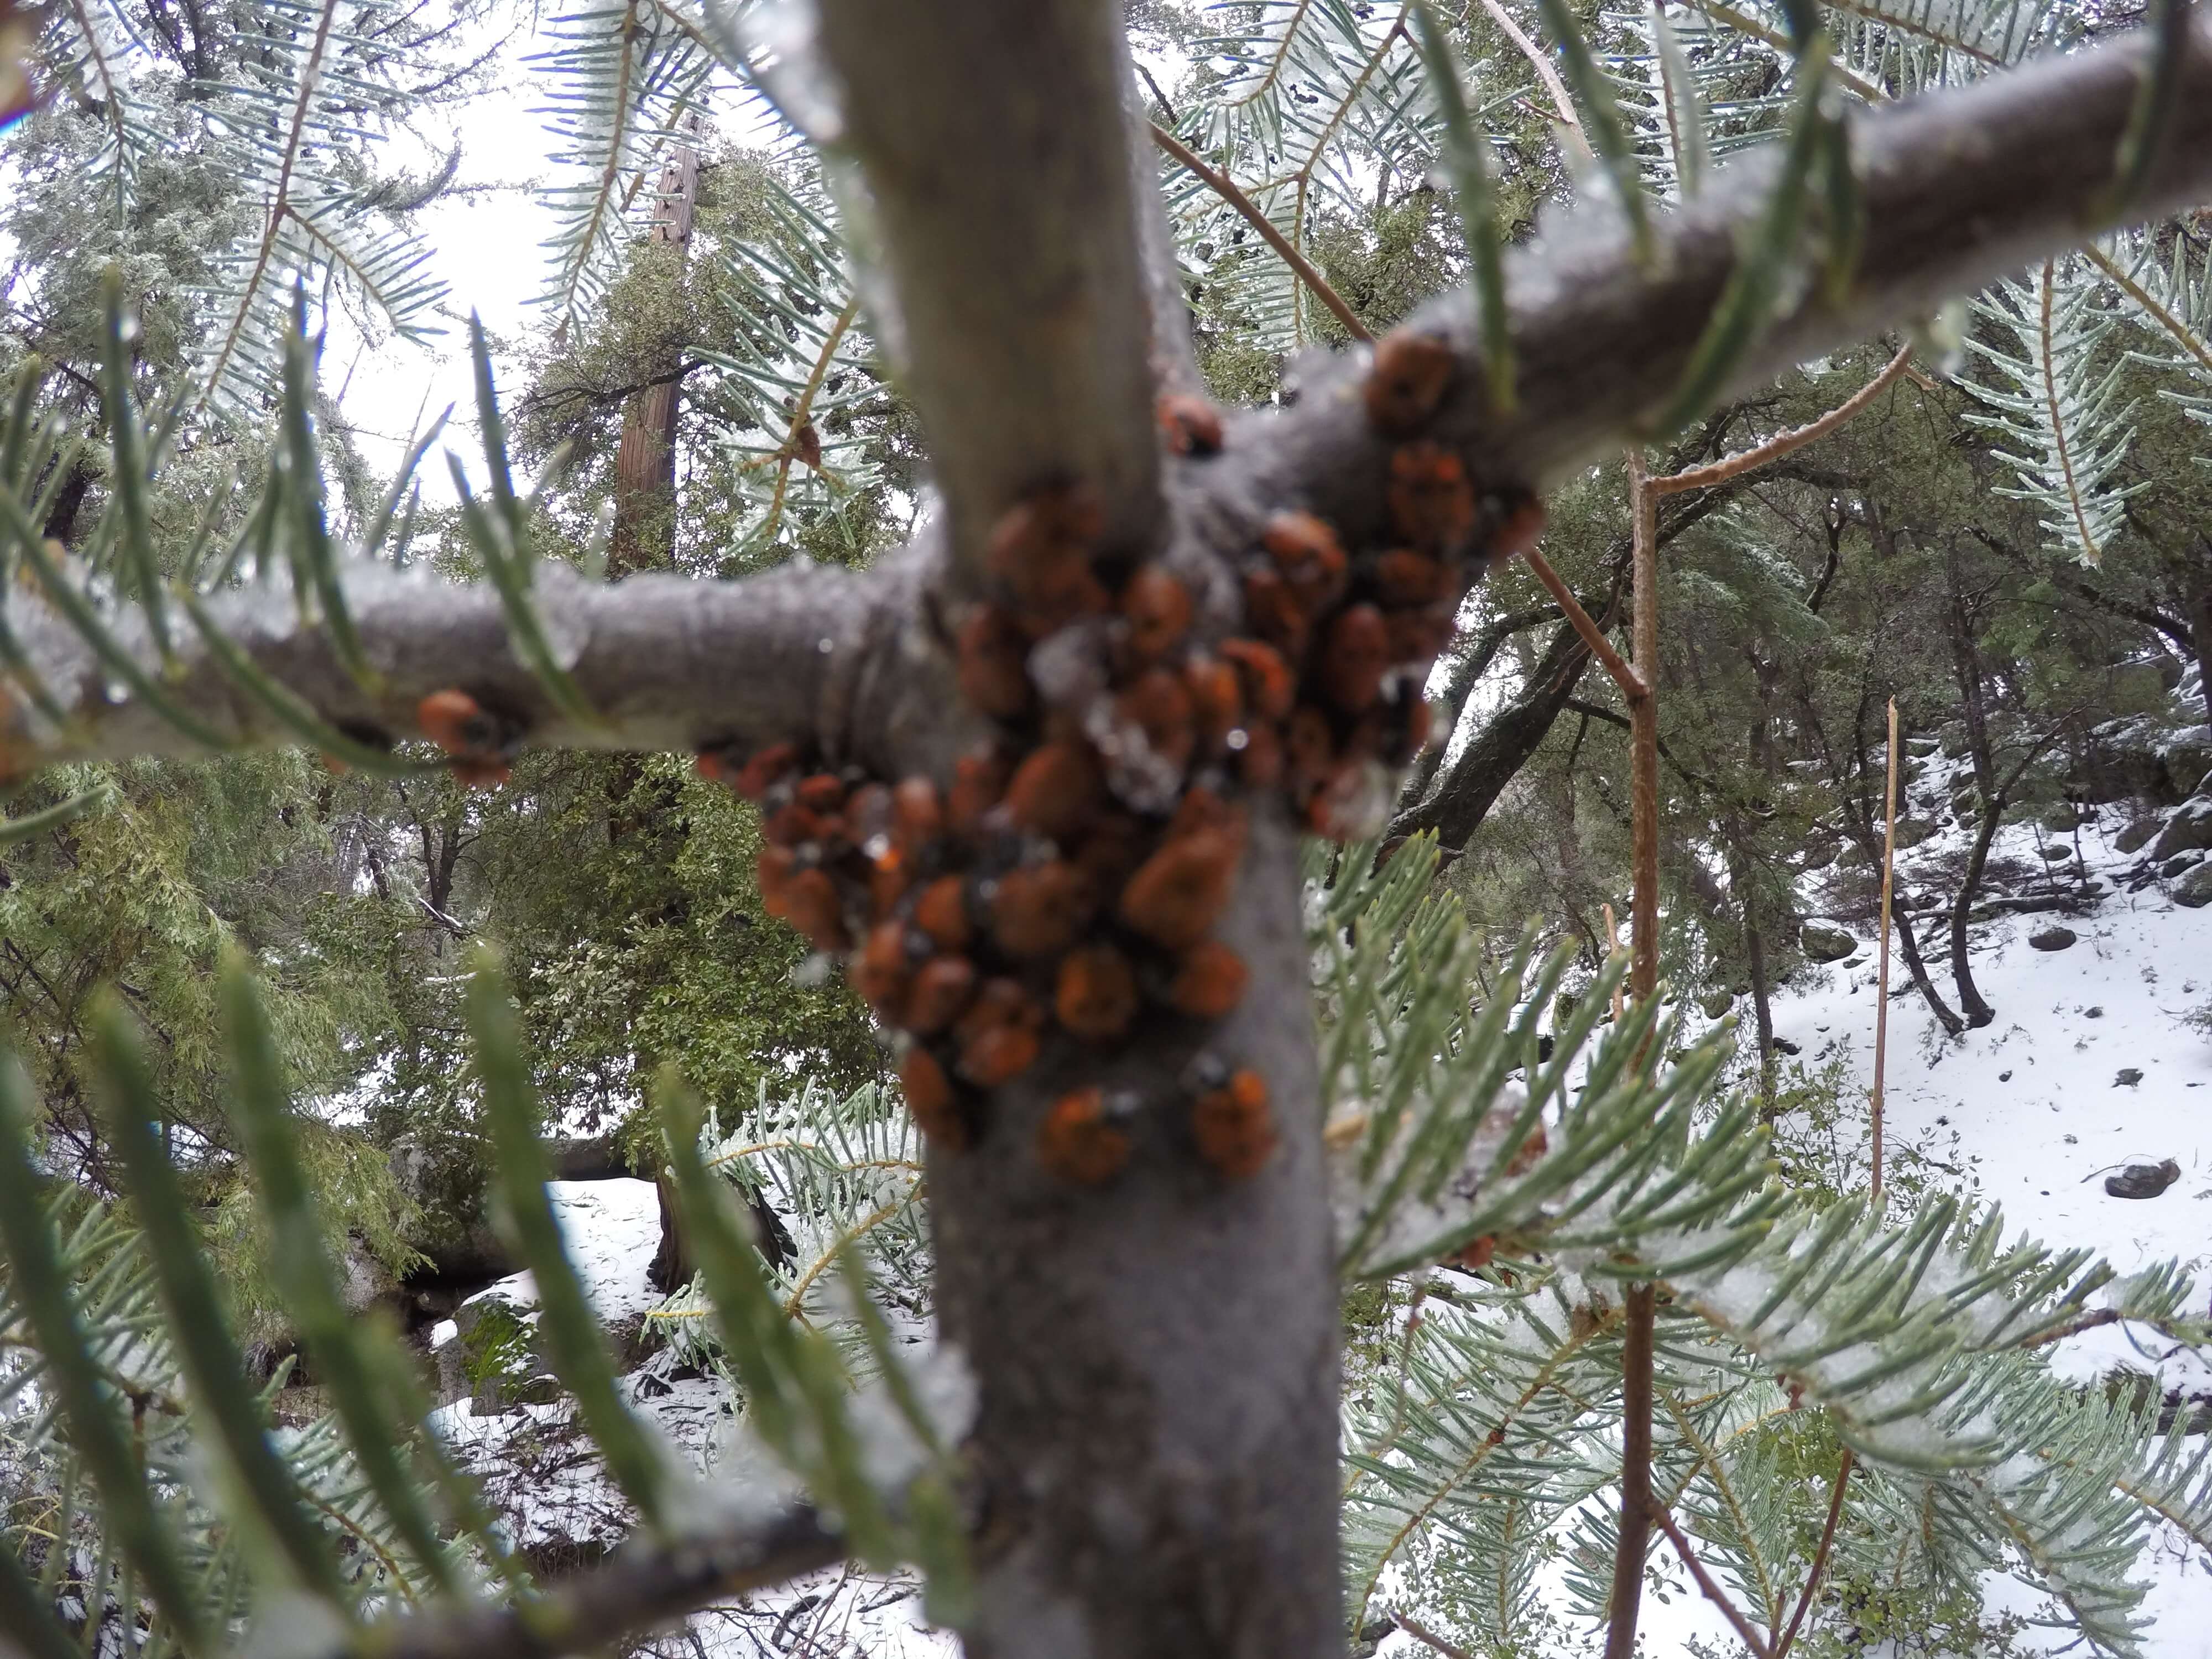 Ladybugs bunched up on a pine tree